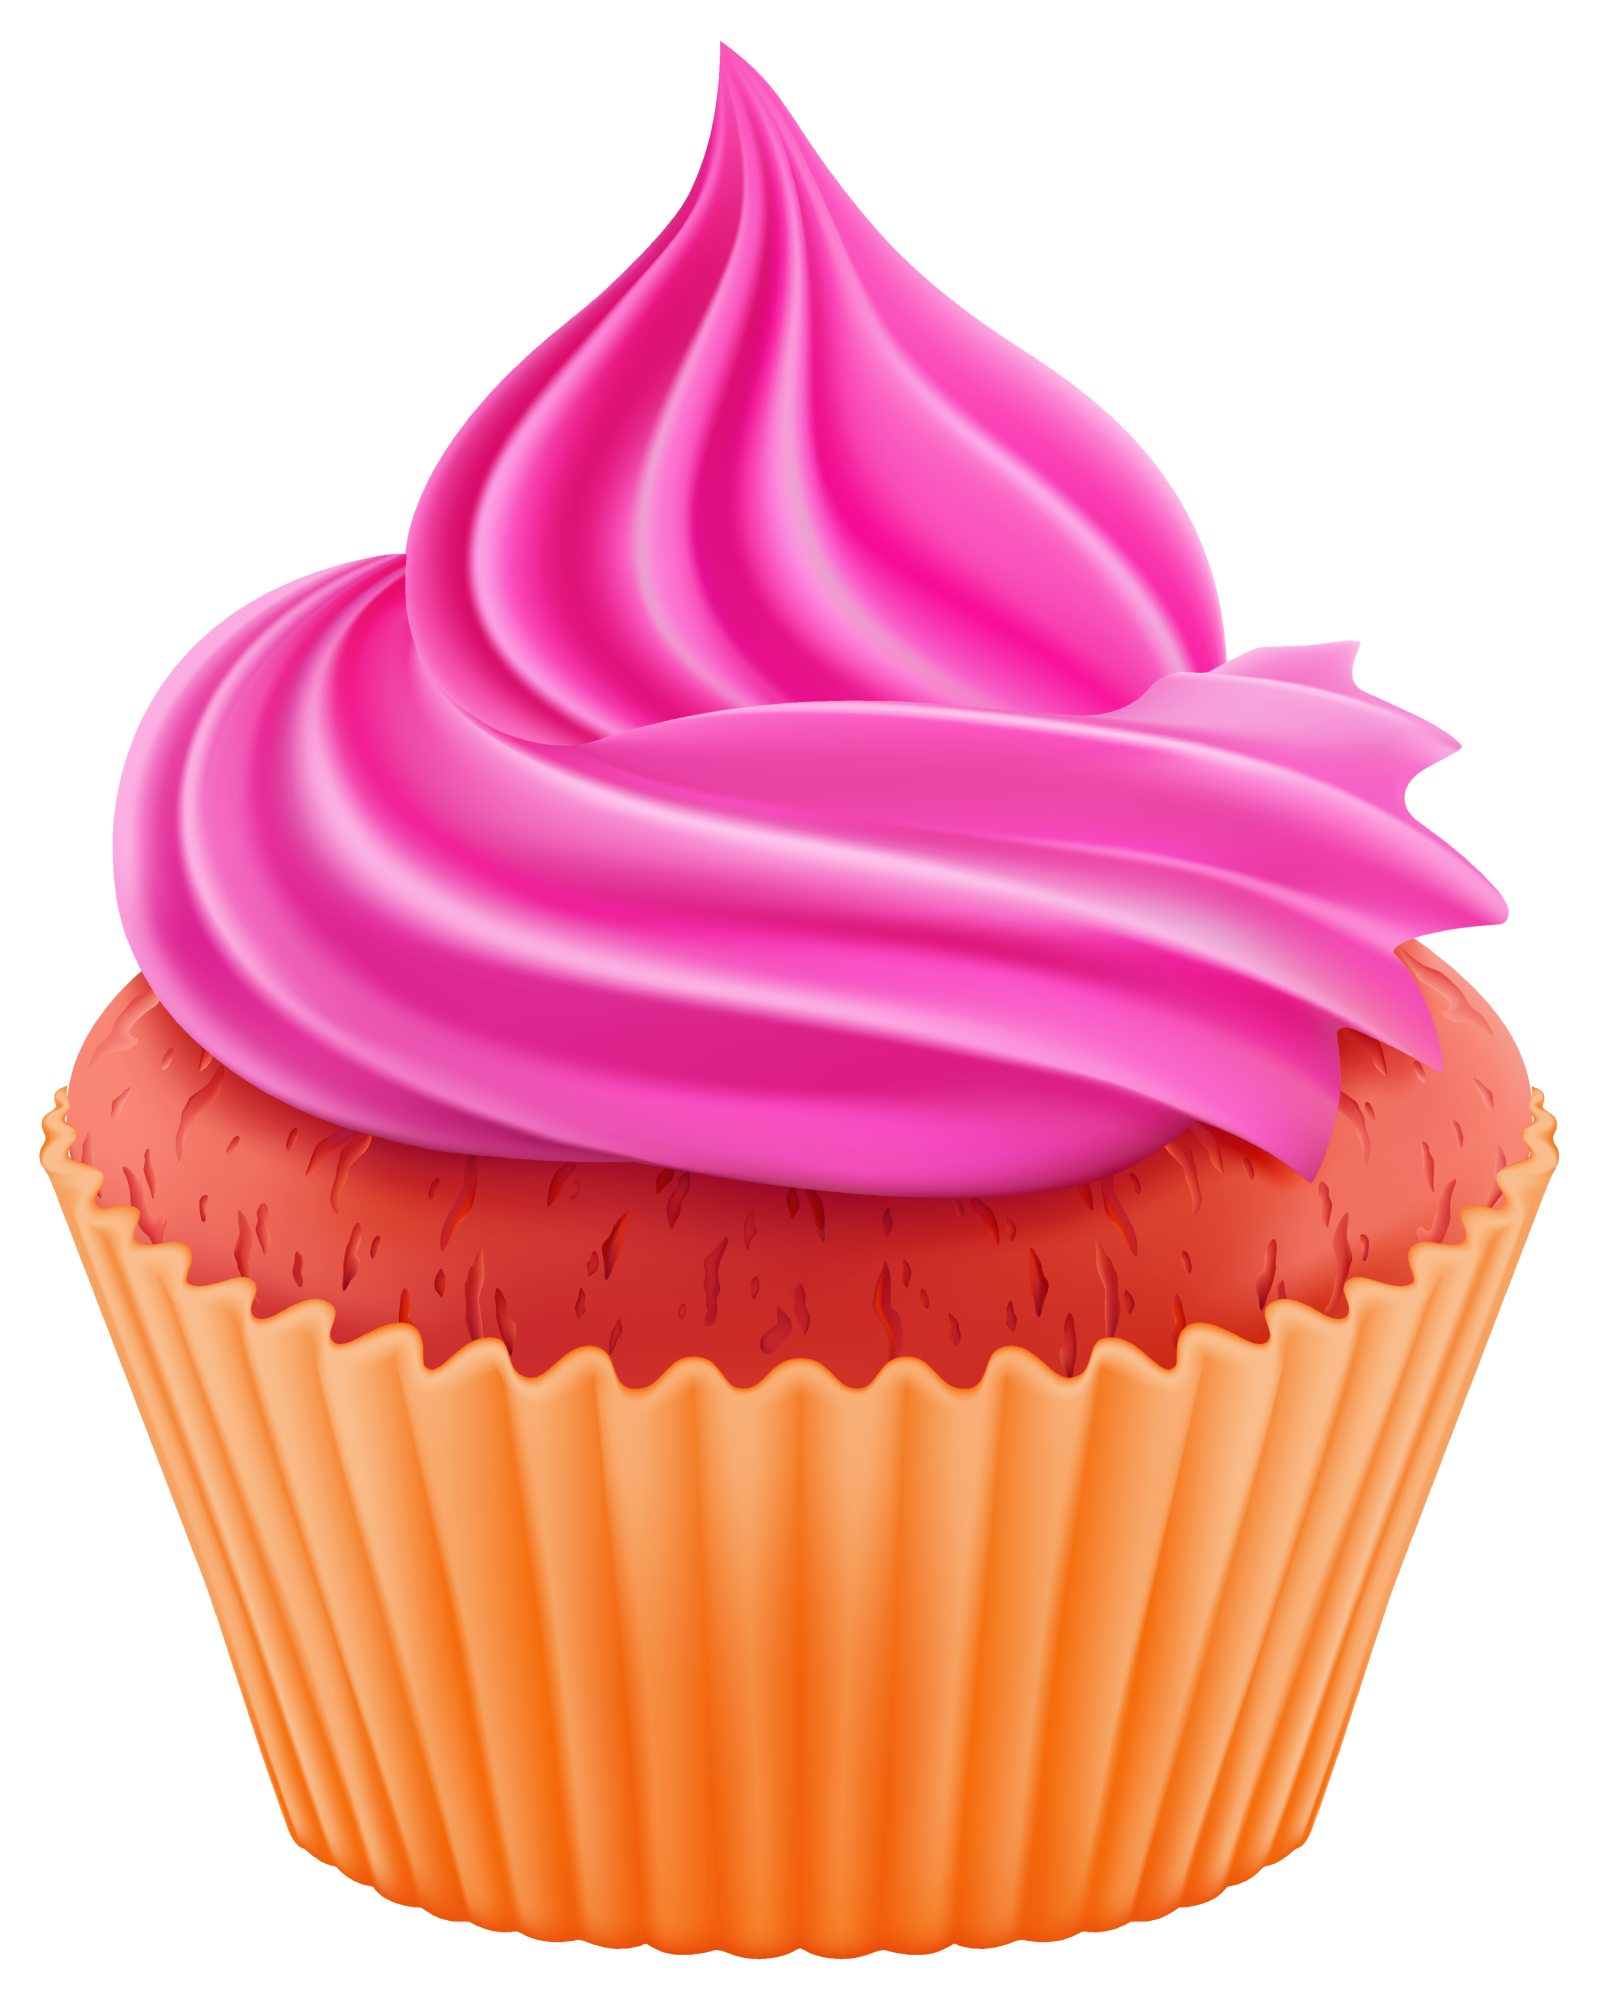 Bakery Sweets PNG Image